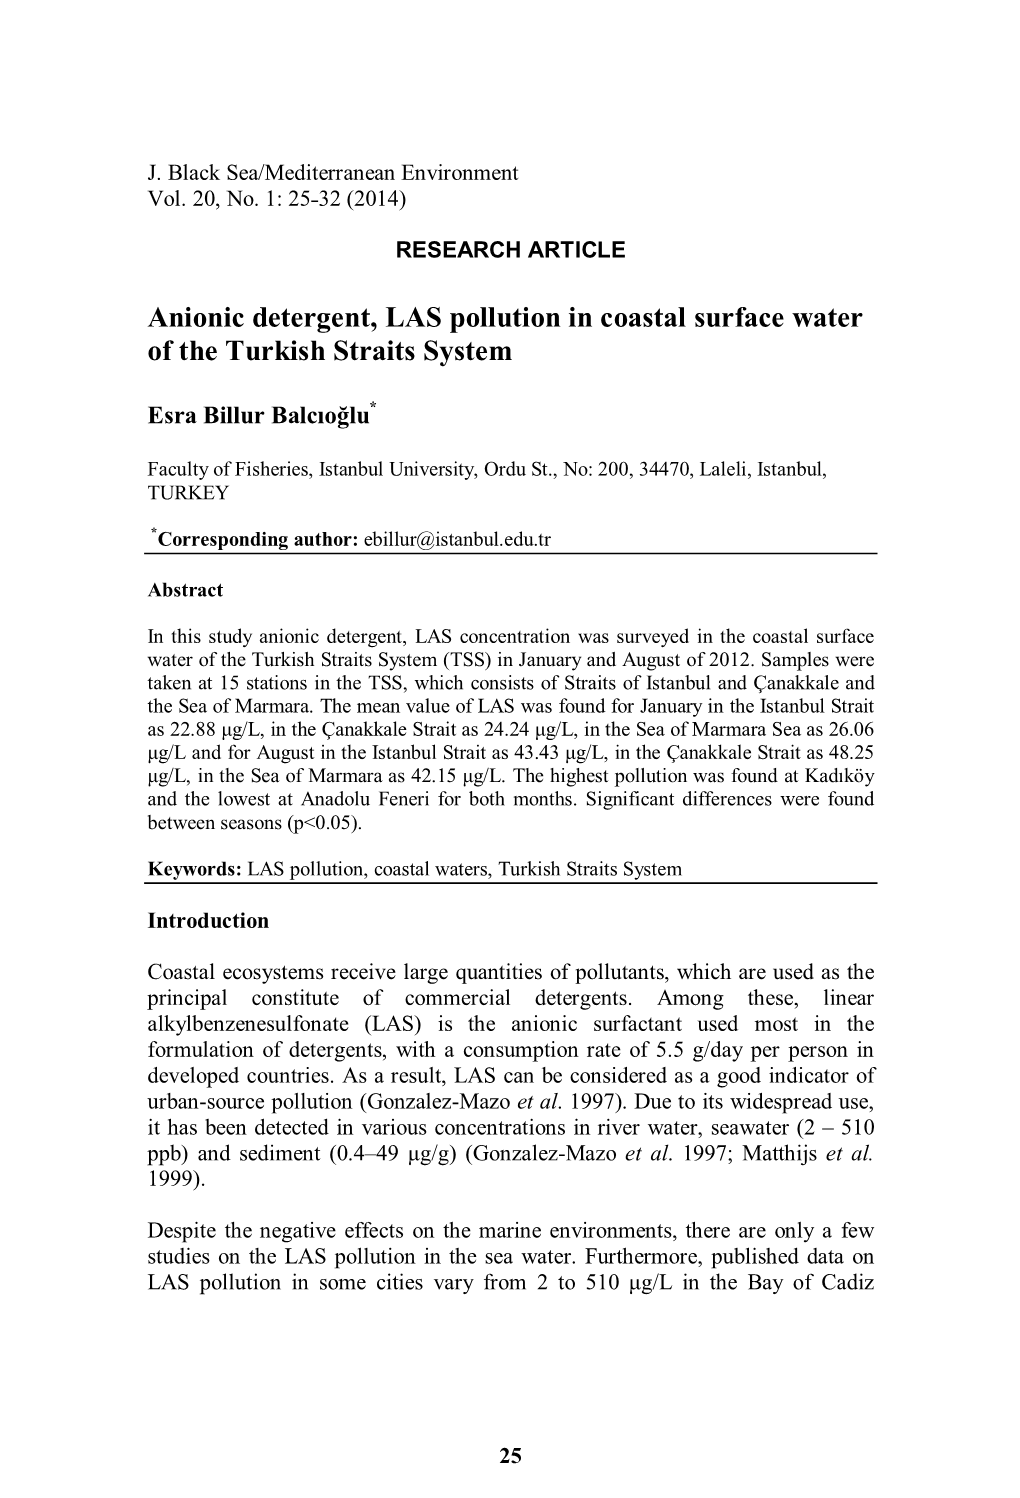 Anionic Detergent, LAS Pollution in Coastal Surface Water of the Turkish Straits System